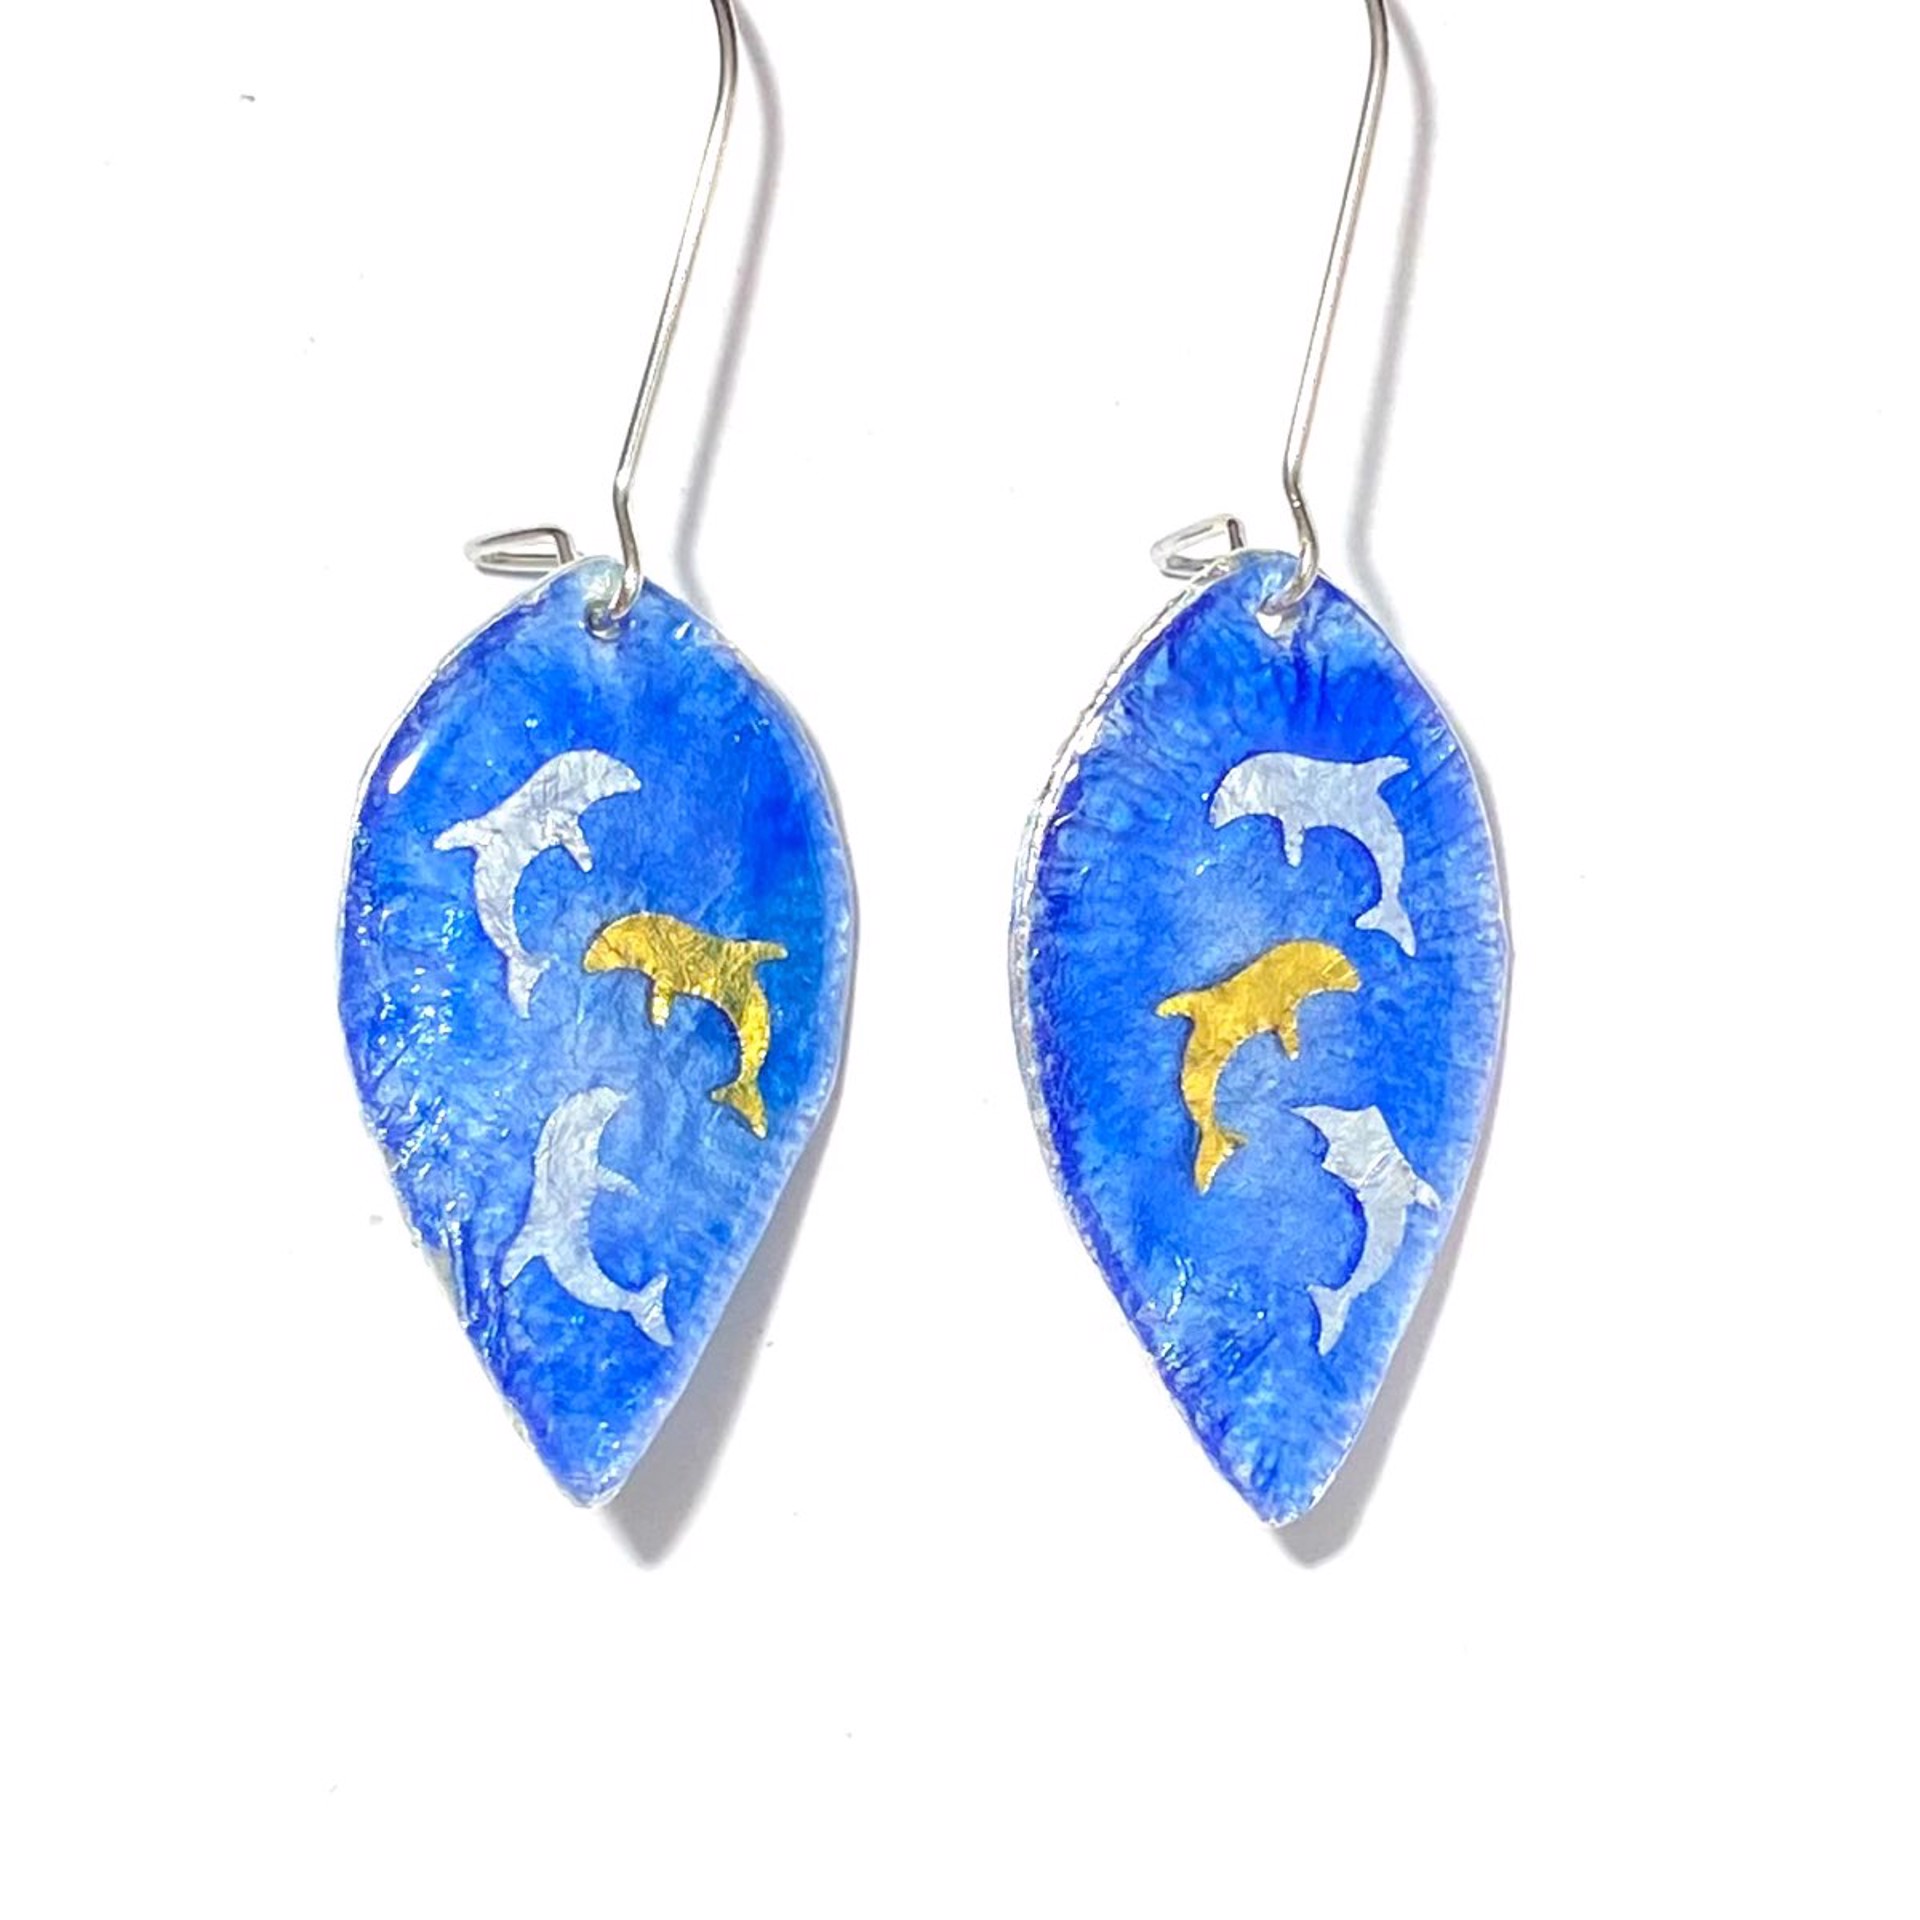 KH22-53 Silver And Gold Dolphins Over Blue Enamel Earrings by Karen Hakim